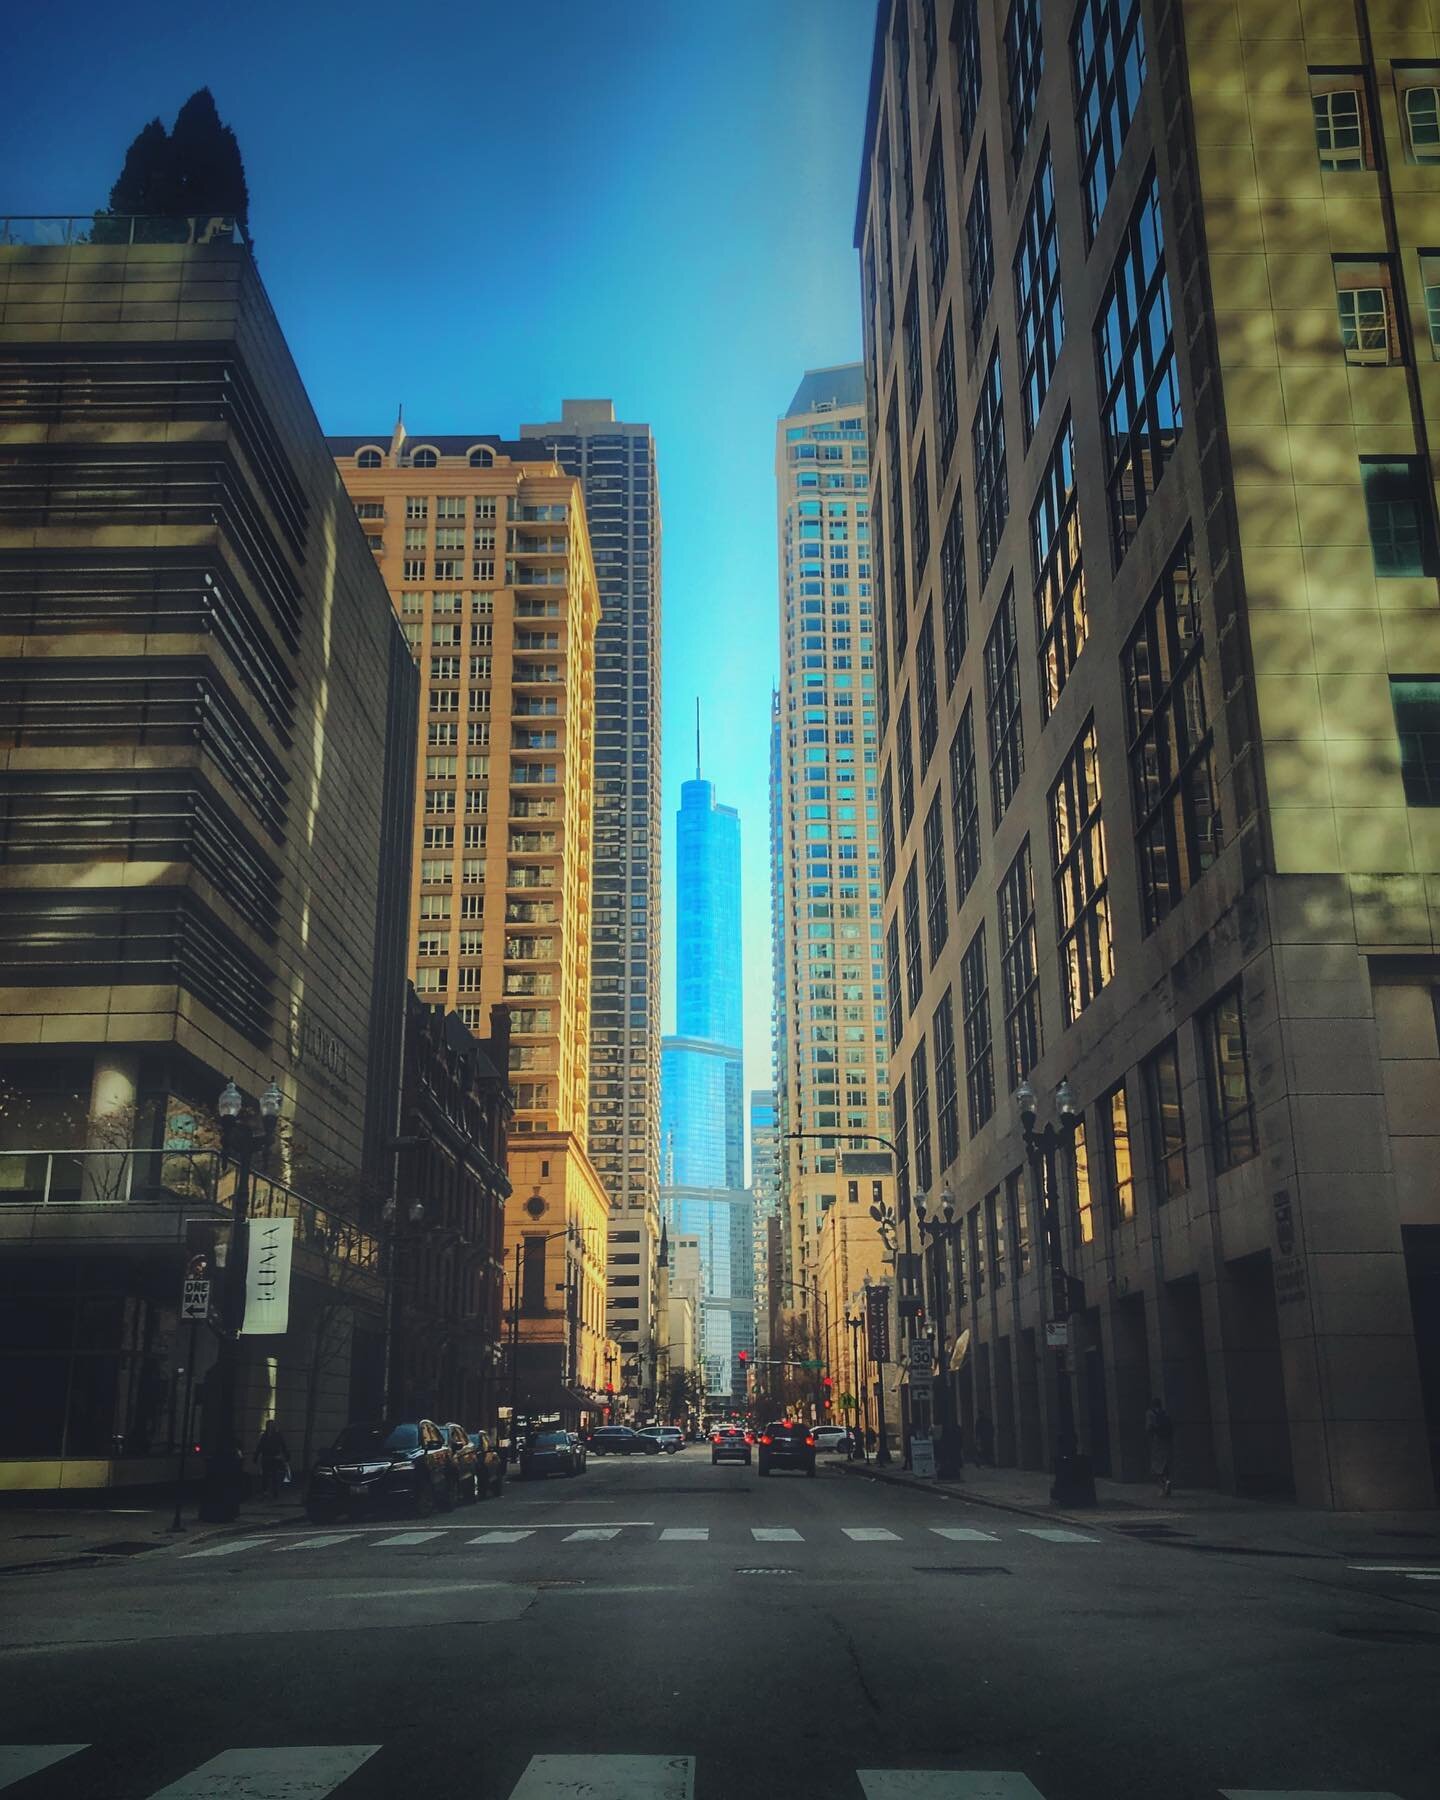 Sunday evening after Cubanos and ballet in the city. Not exactly #chicagohenge, still a nice view.